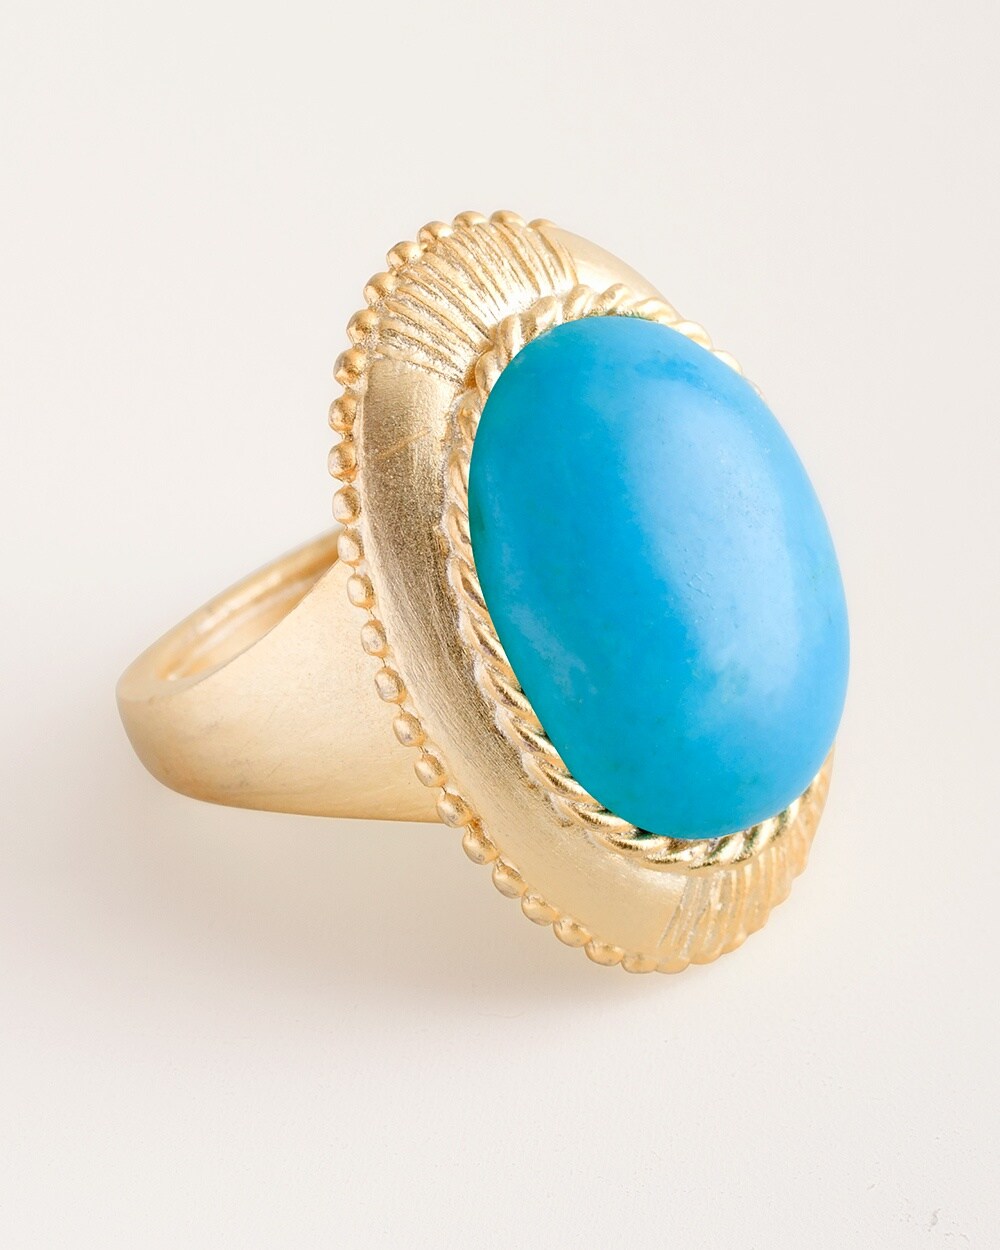 Turquoise-Hued Ring